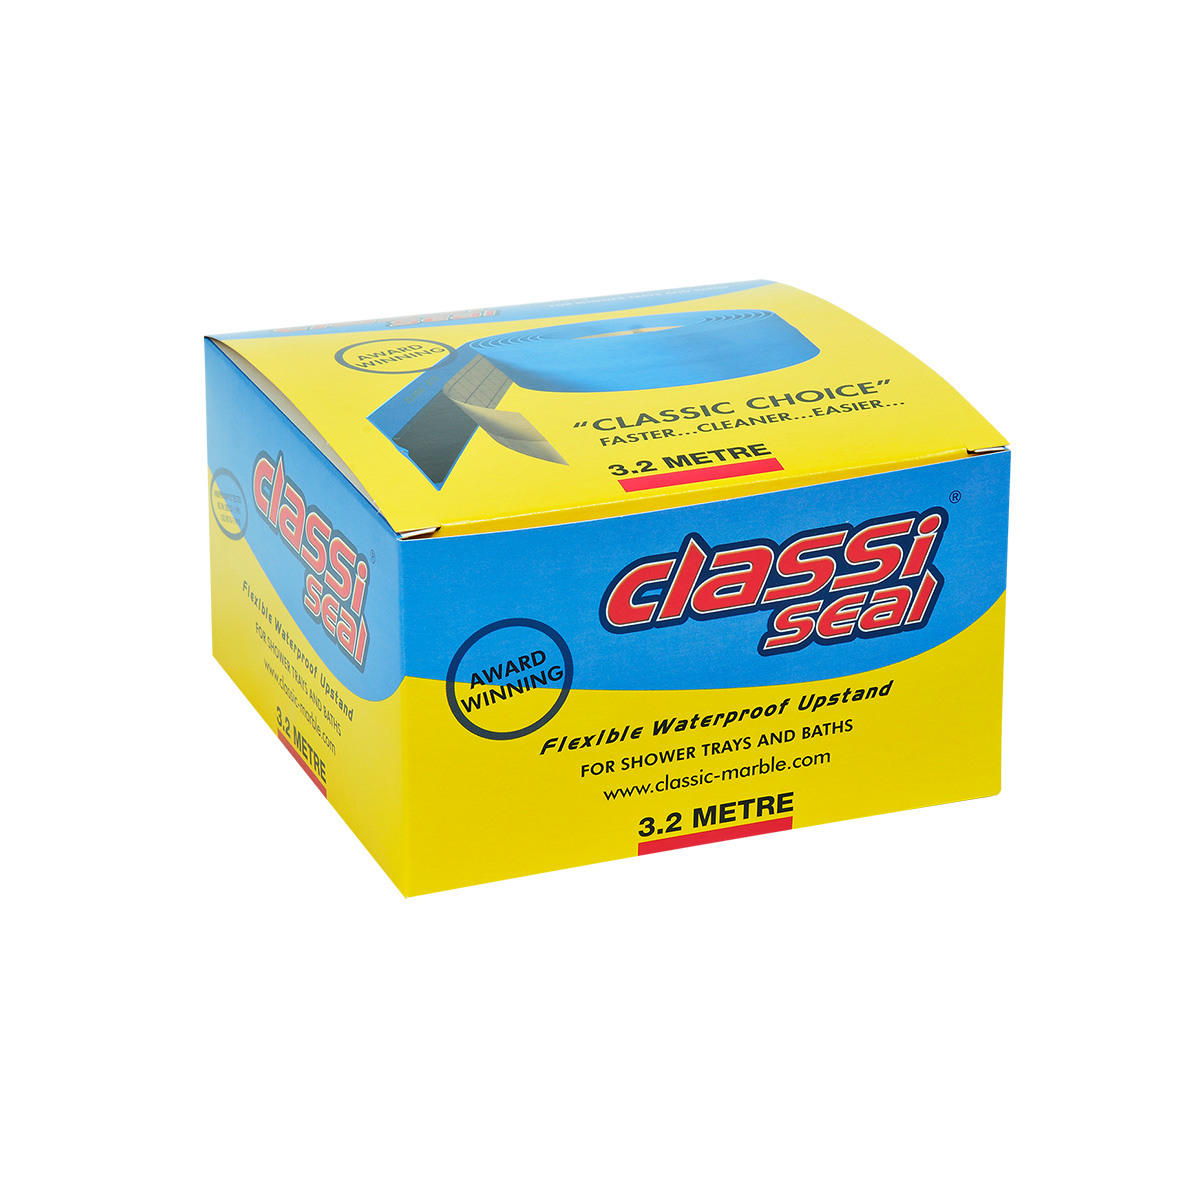 3.2m roll of Classi Seal